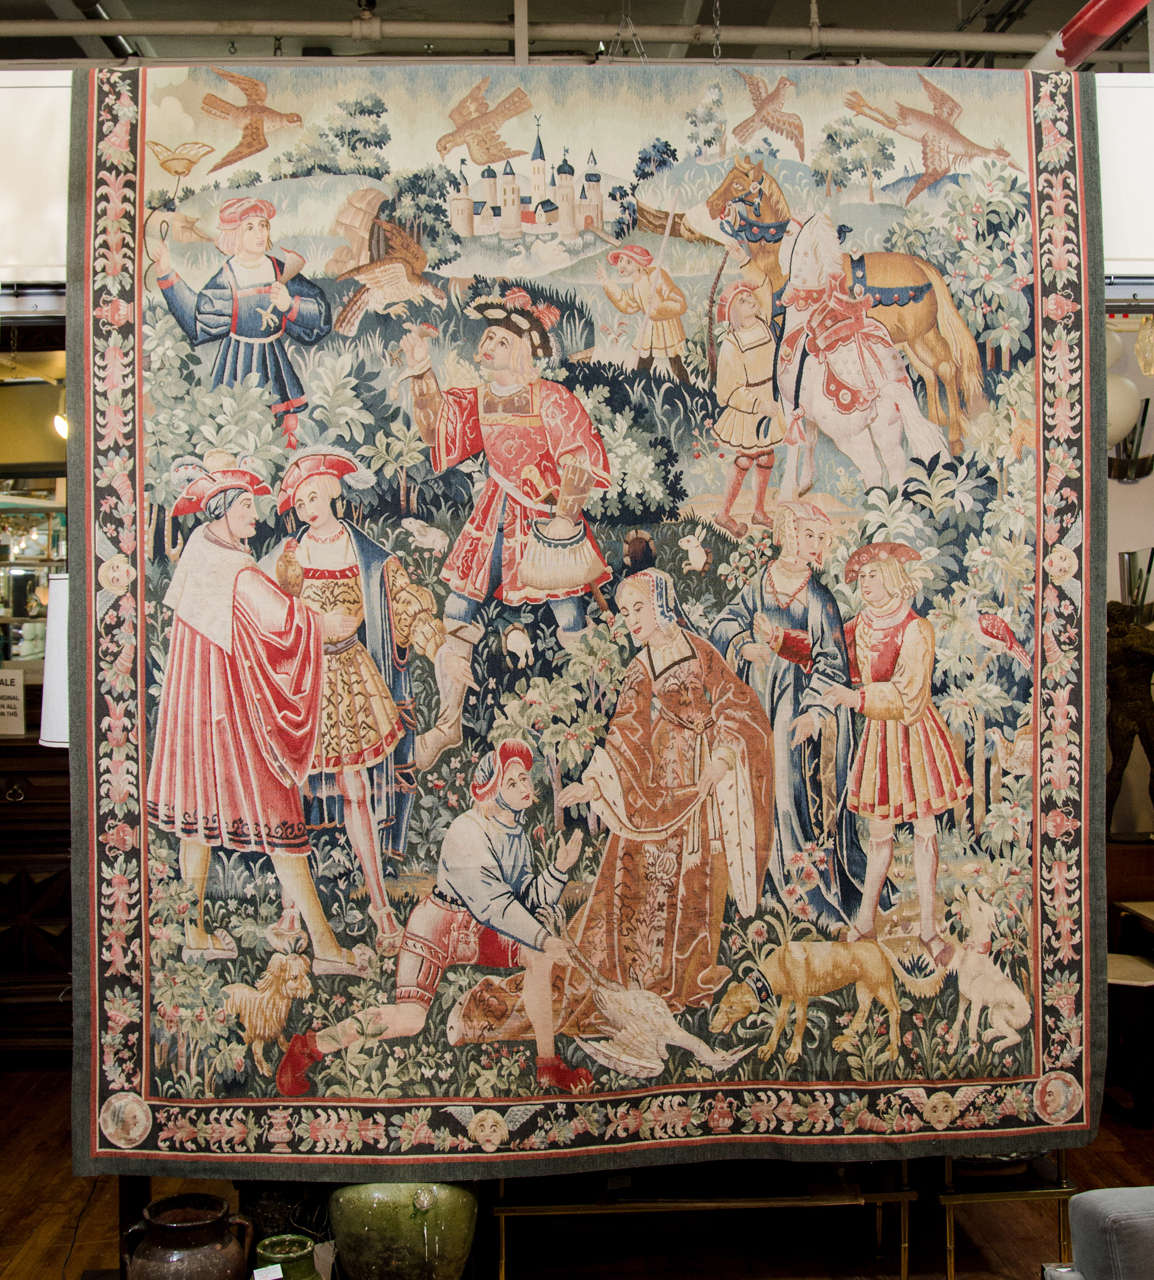 Unknown A Vintage Tapestry with Medieval Themes